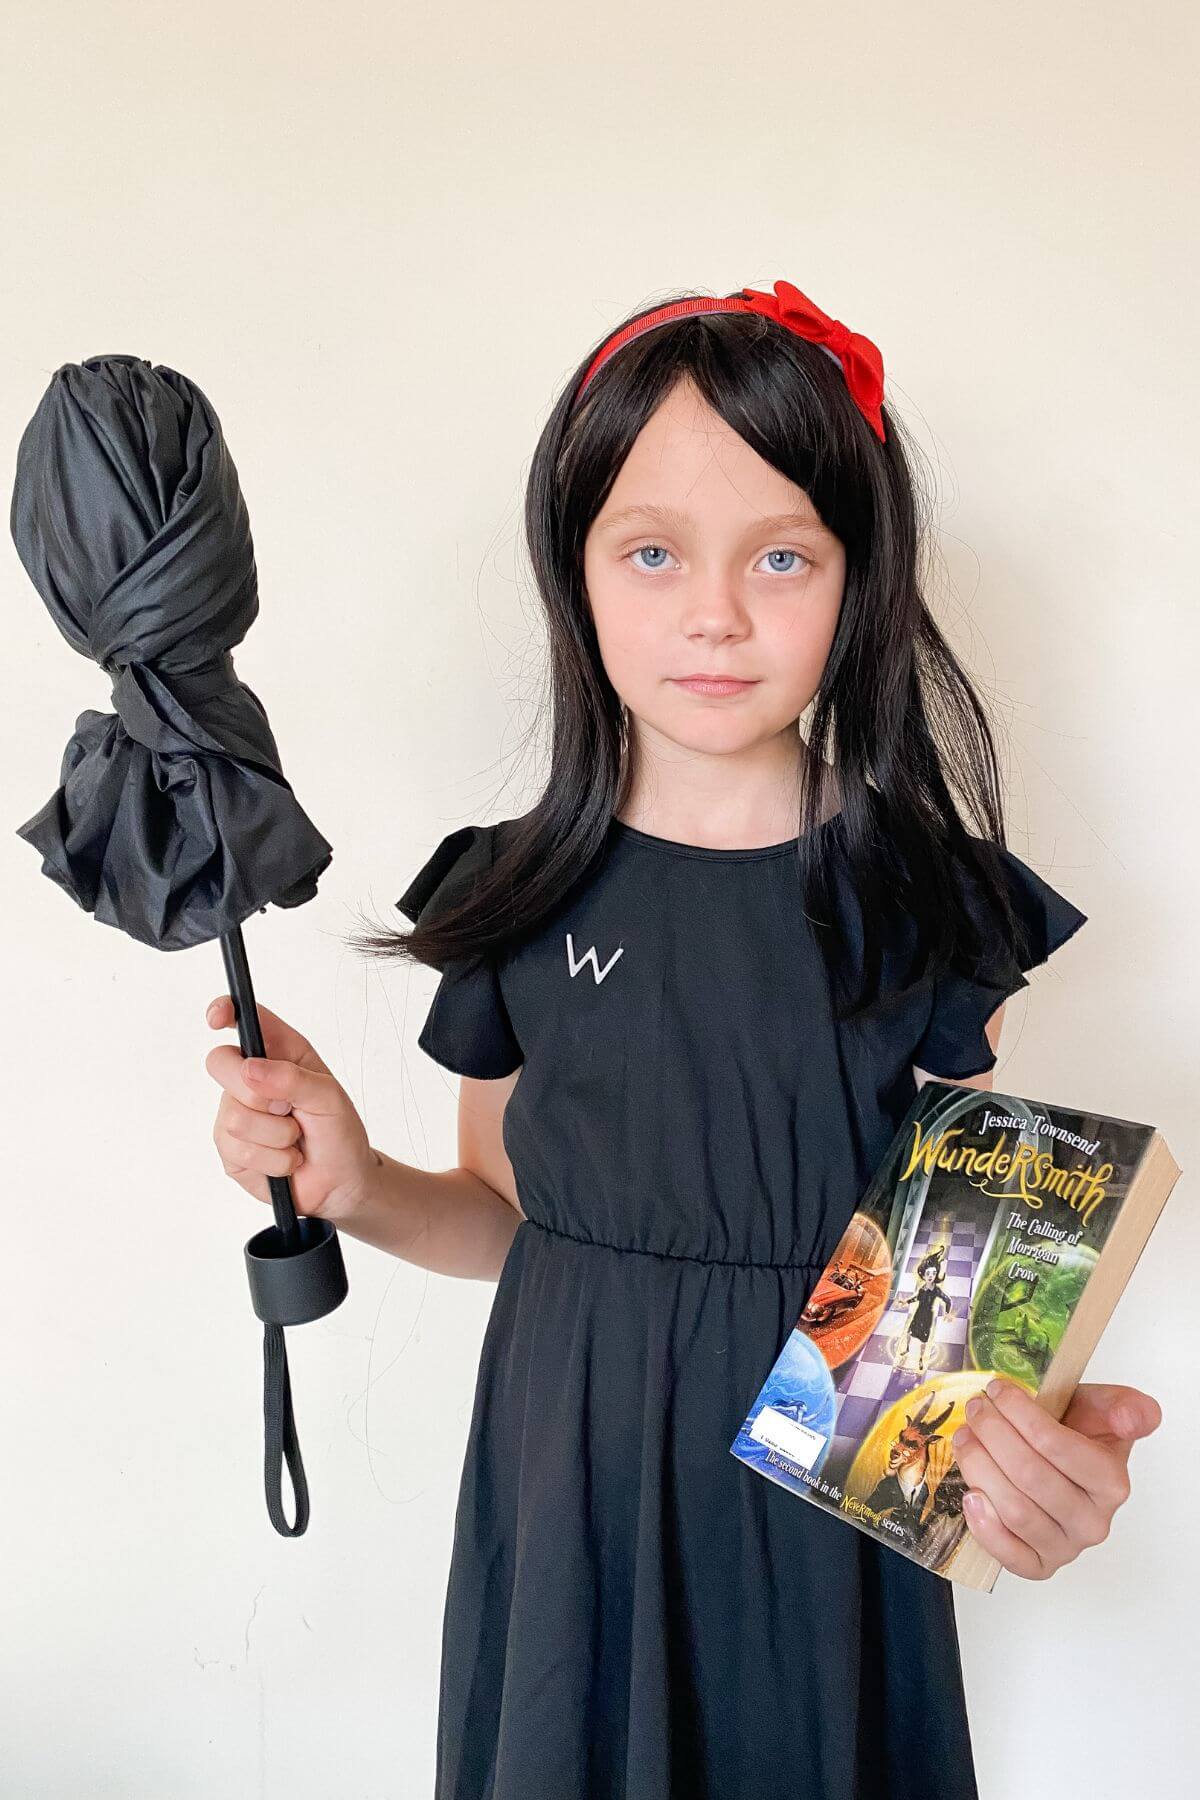 Child with serious face holding a black umbrella and a wundersmith: the trials of morrigan crow book in her hand